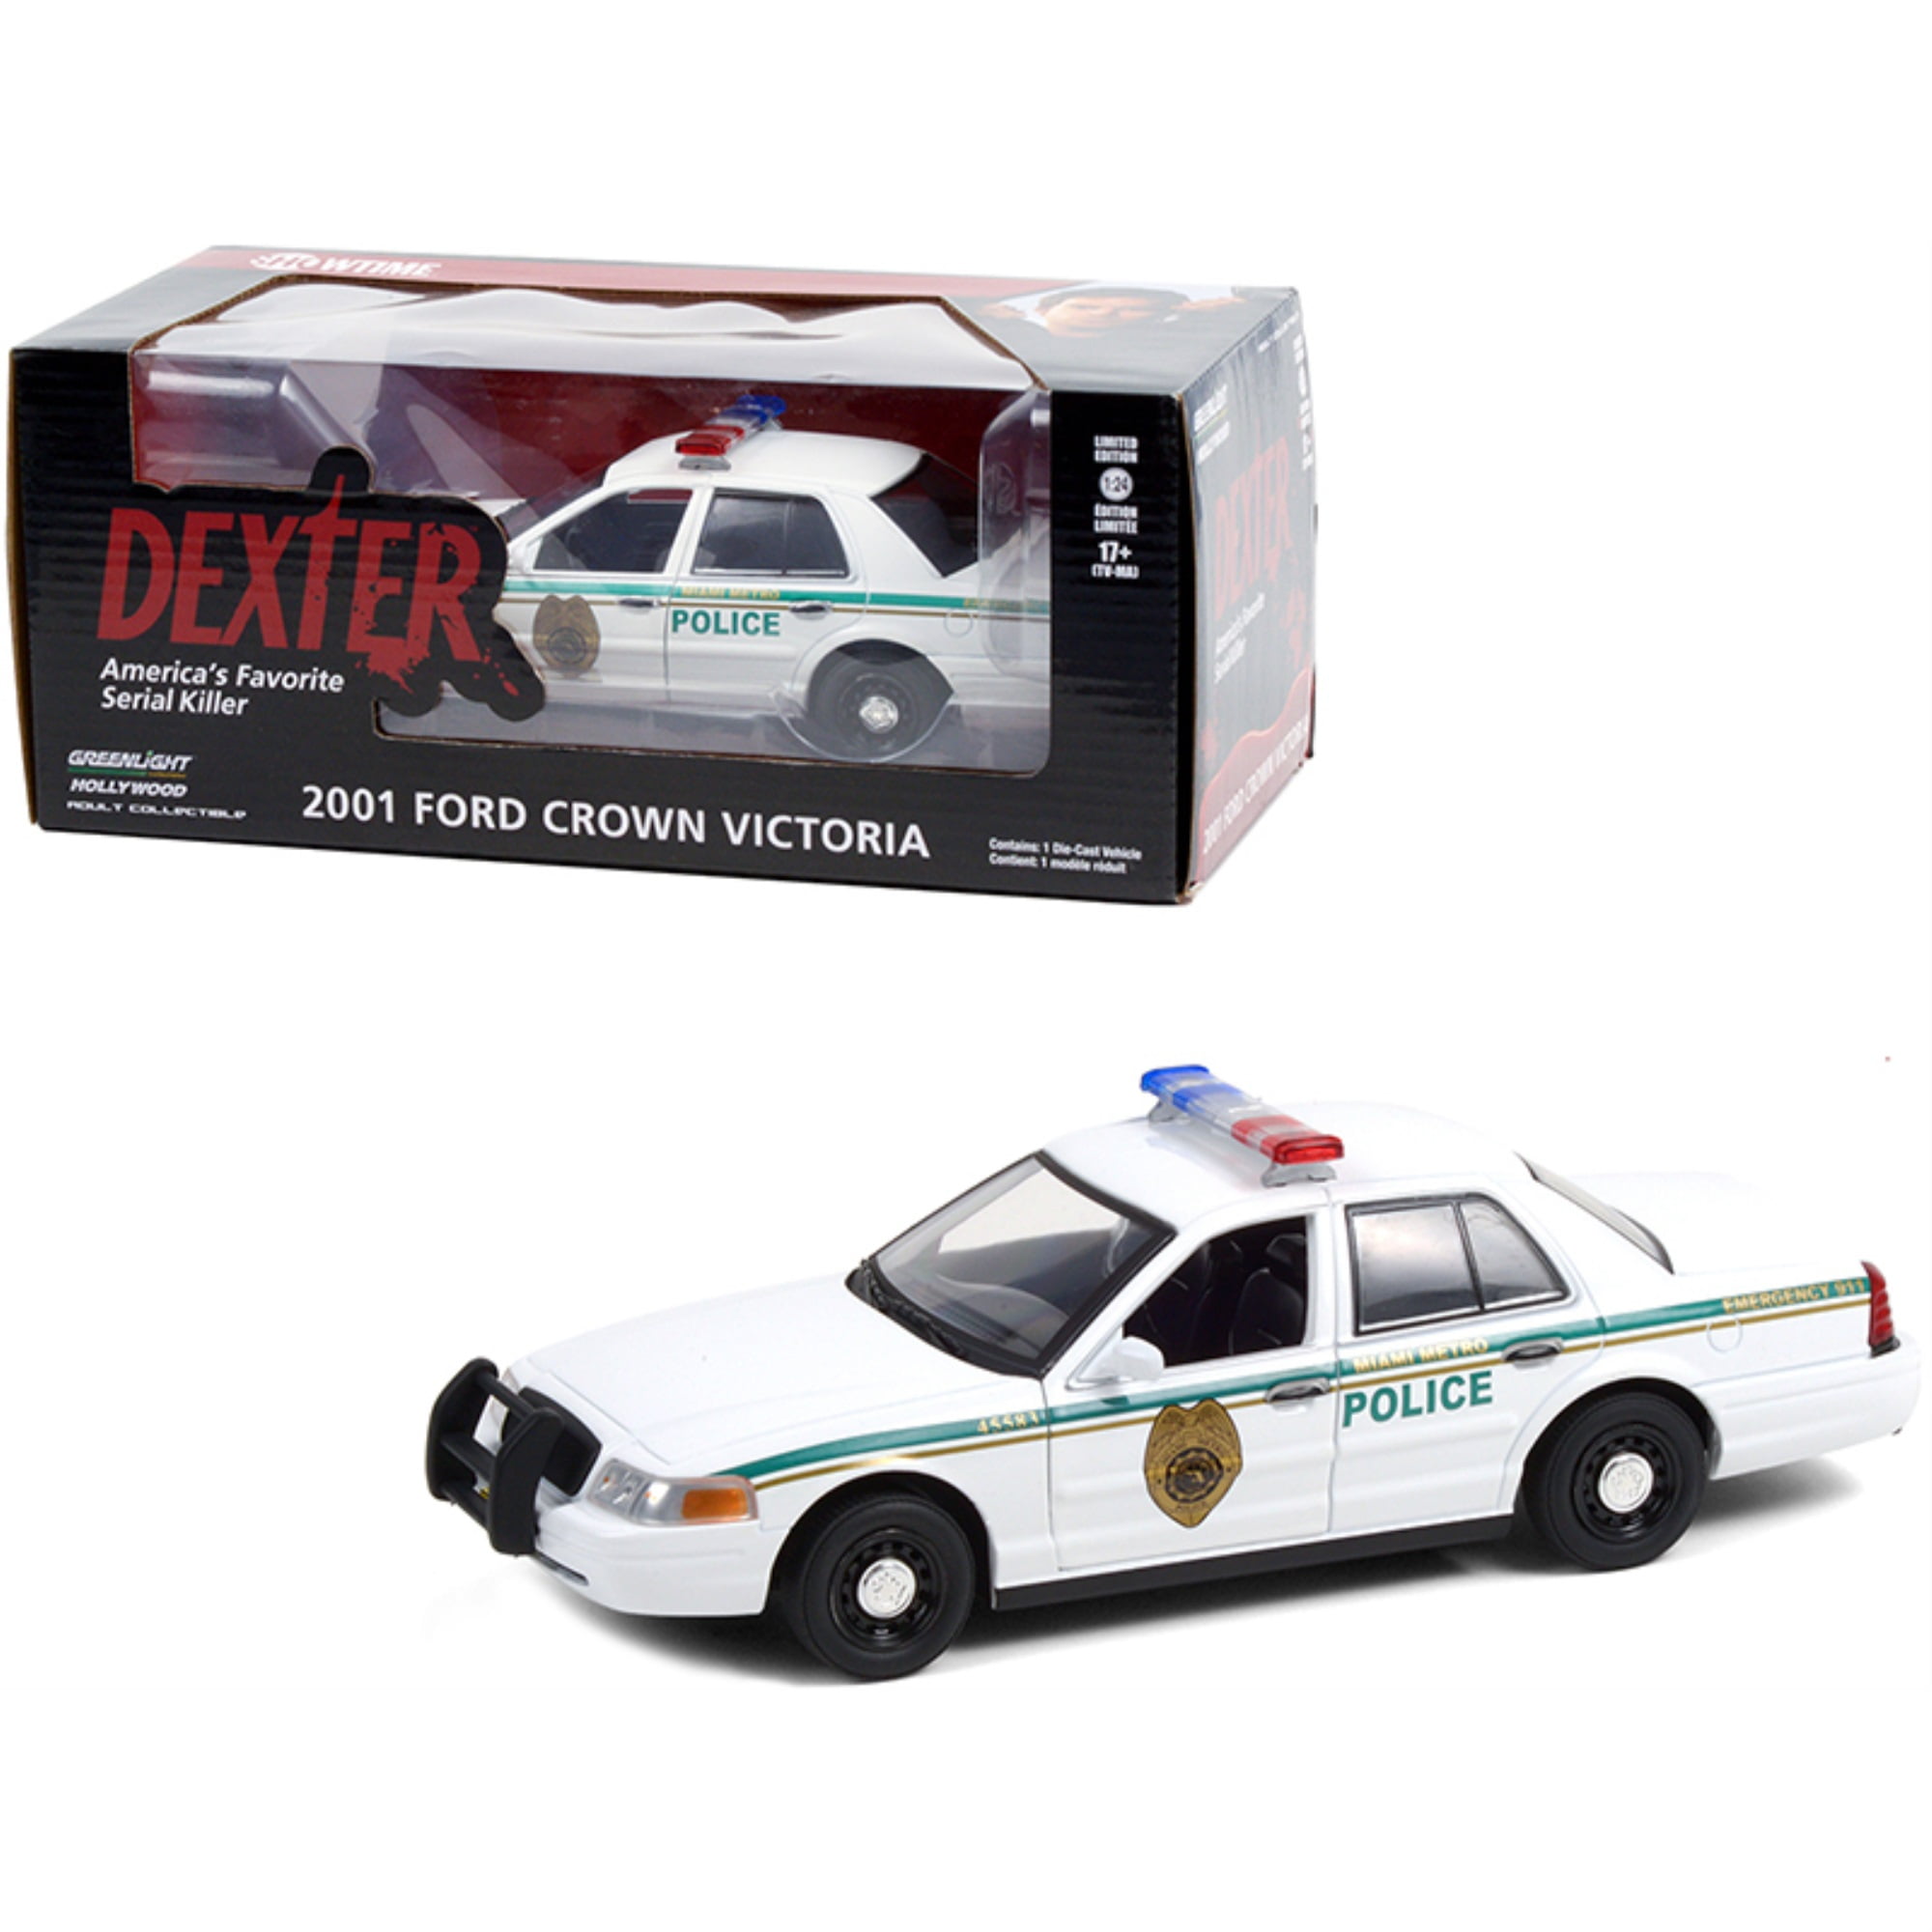 GREENLIGHT 85511 85512 or 85513 HOT PURSUIT DODGE PLYMOUTH FORD Police Car 1:24 